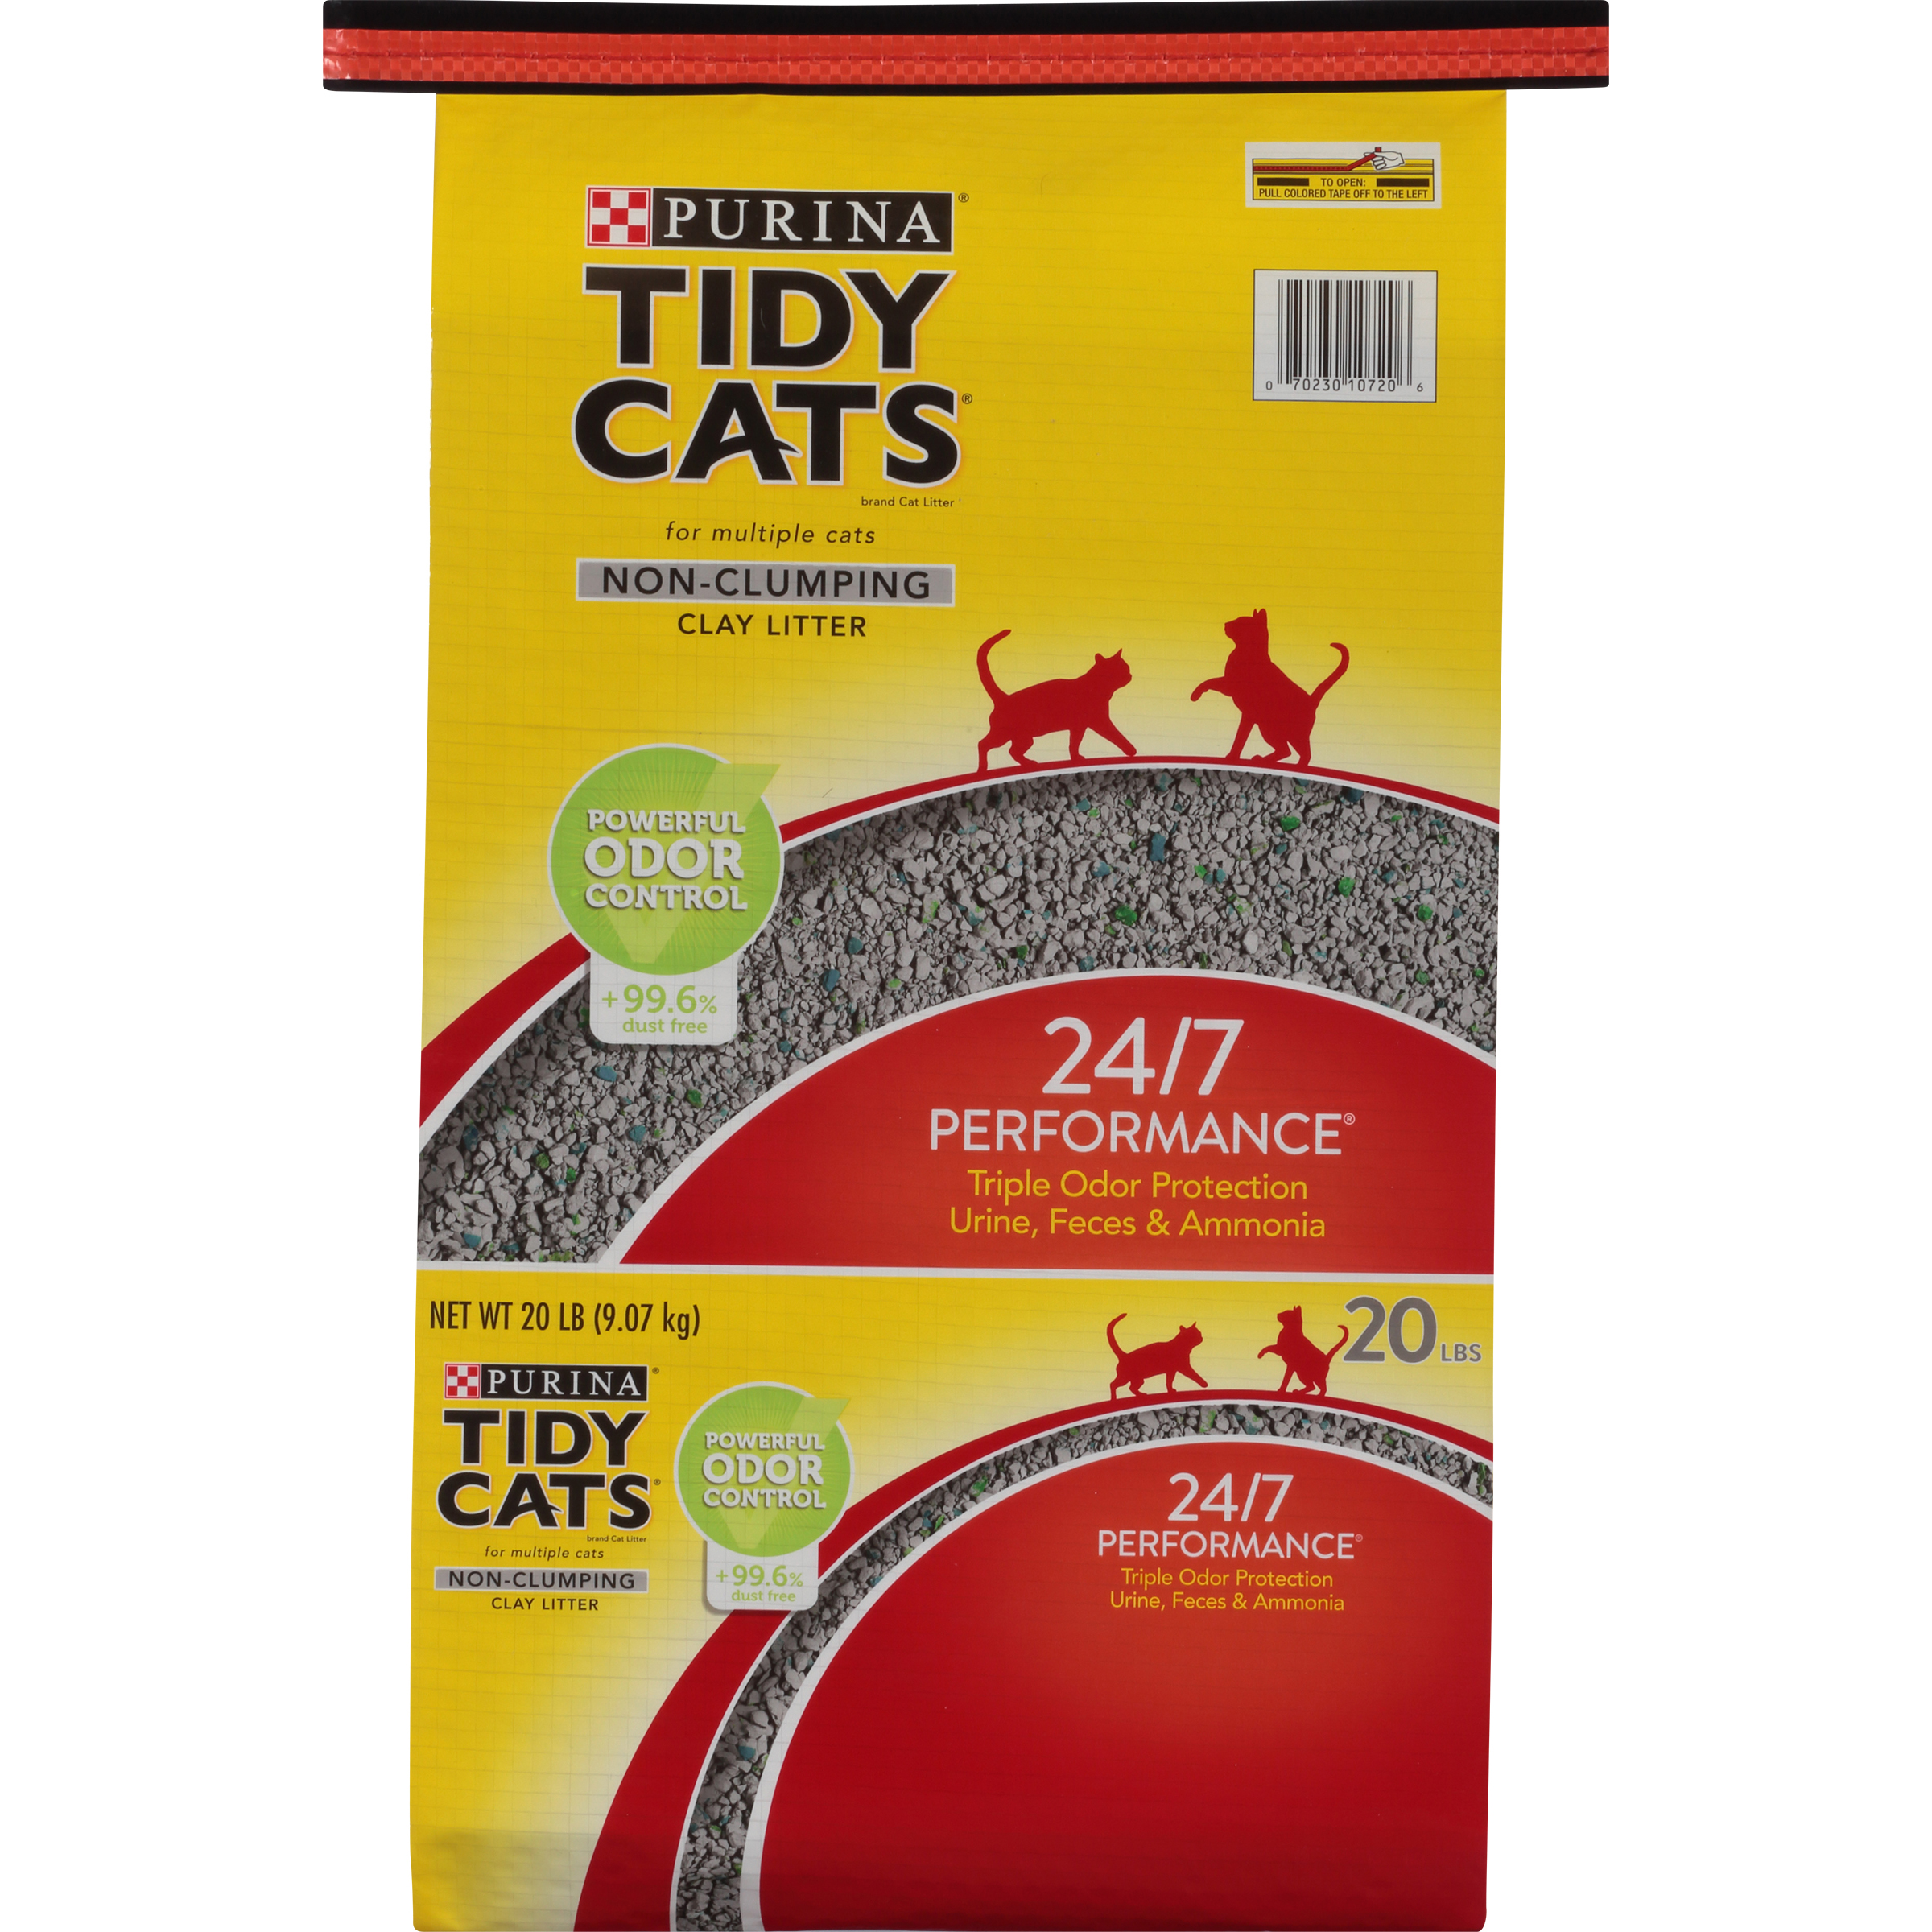 Purina Tidy Cats Non Clumping 24/7 Performance Multi Cat Litter 20# bag